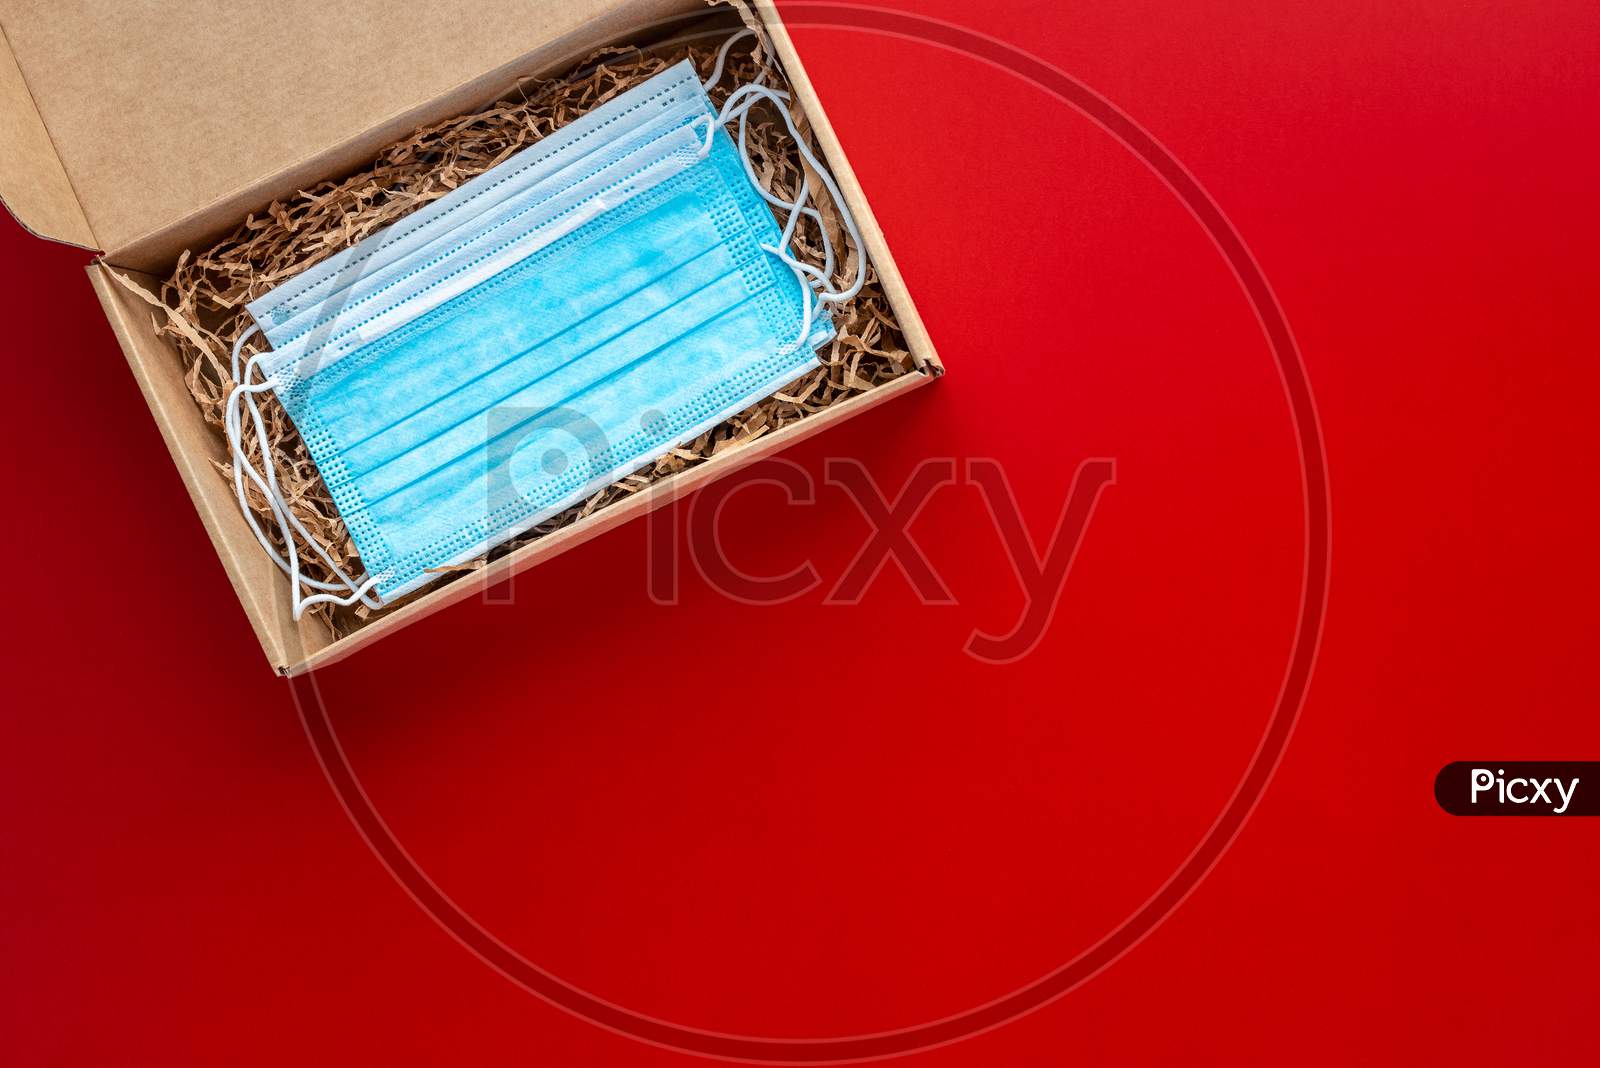 Packing A Christmas Present During Coronavirus Epidemic. Face Masks Inside A Cardboard Box On A Red Background.